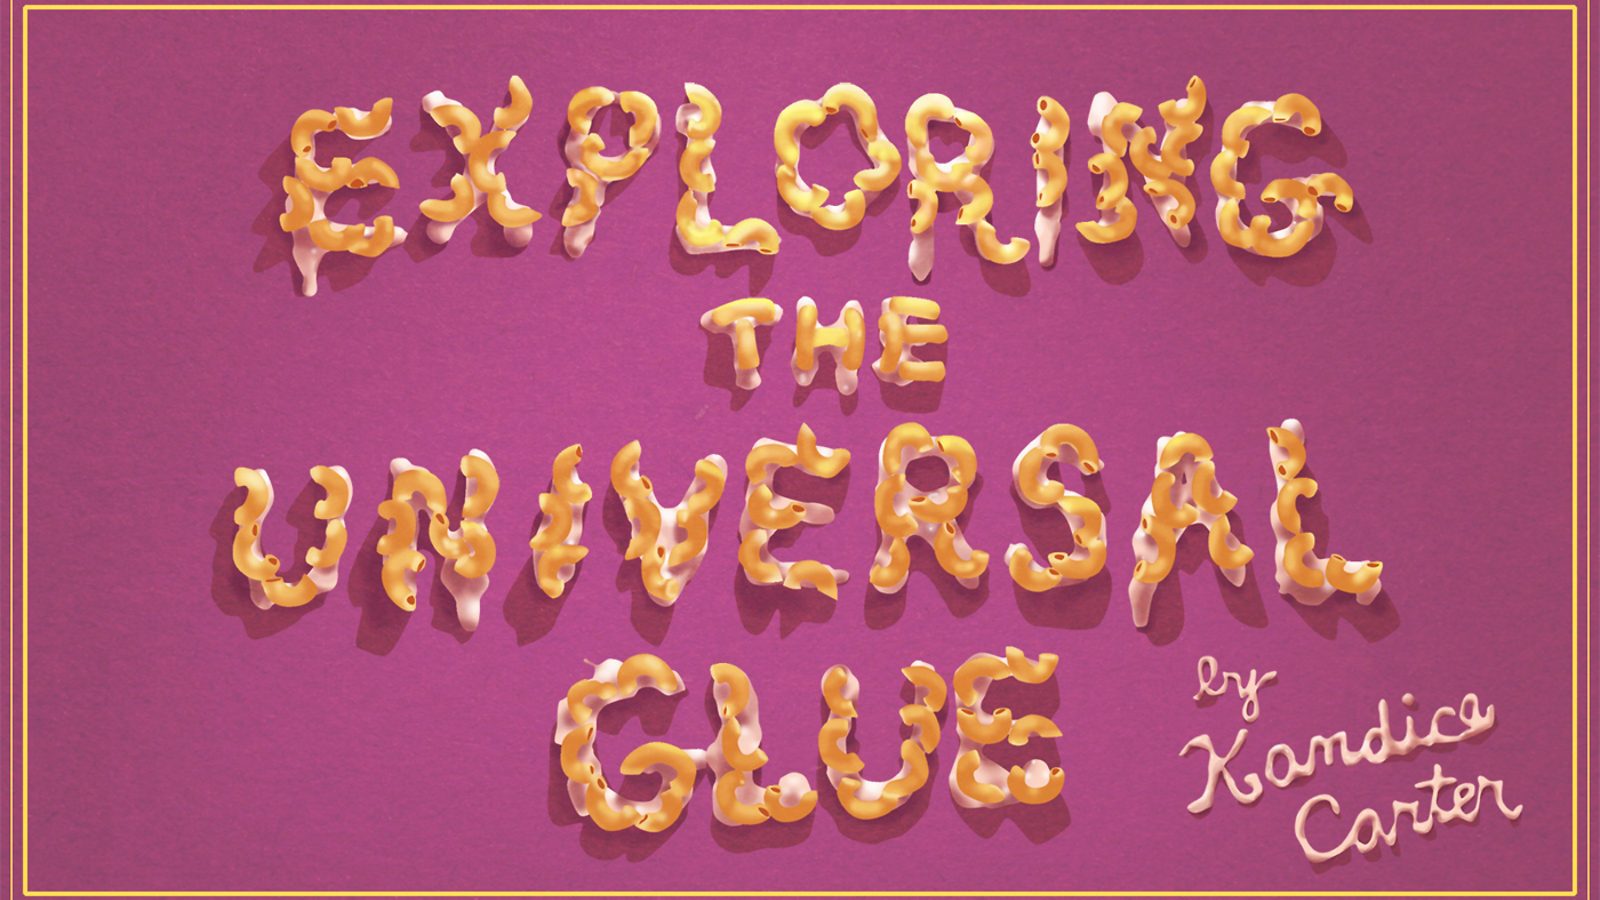 Illustration of "Exploring the Universal Glue by: Kandice Carter"